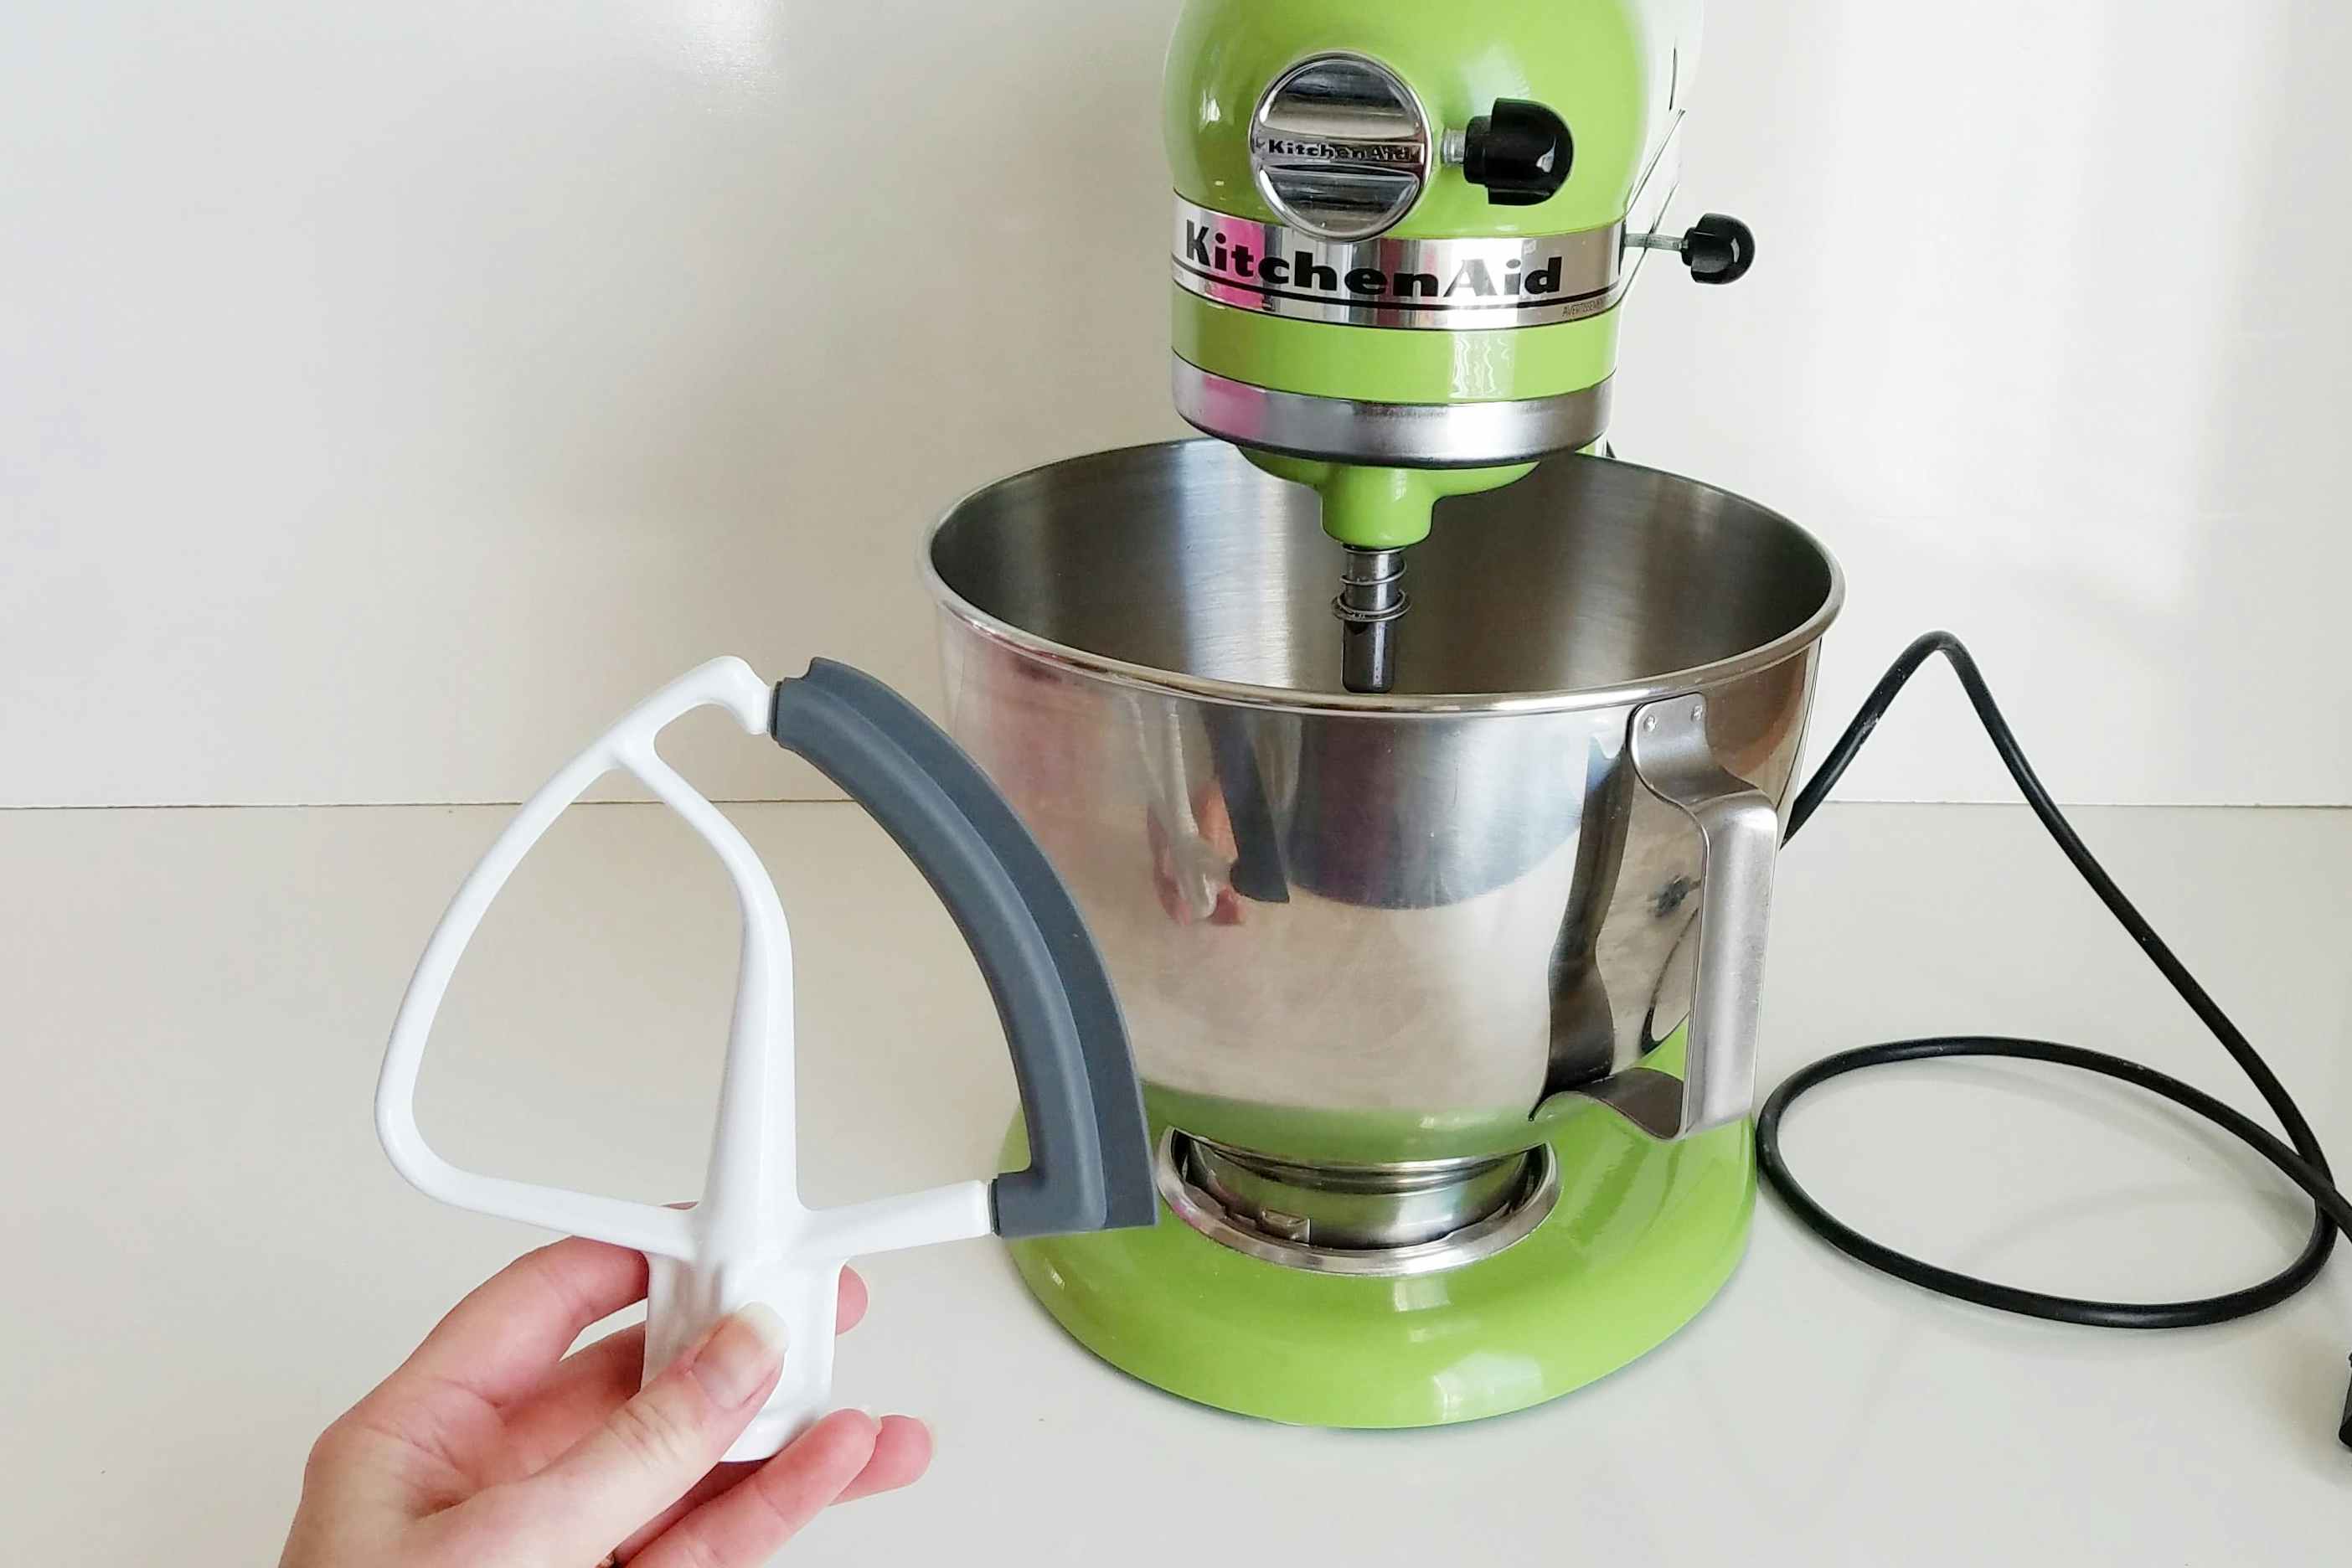 Stand mixer help for Full Proof method